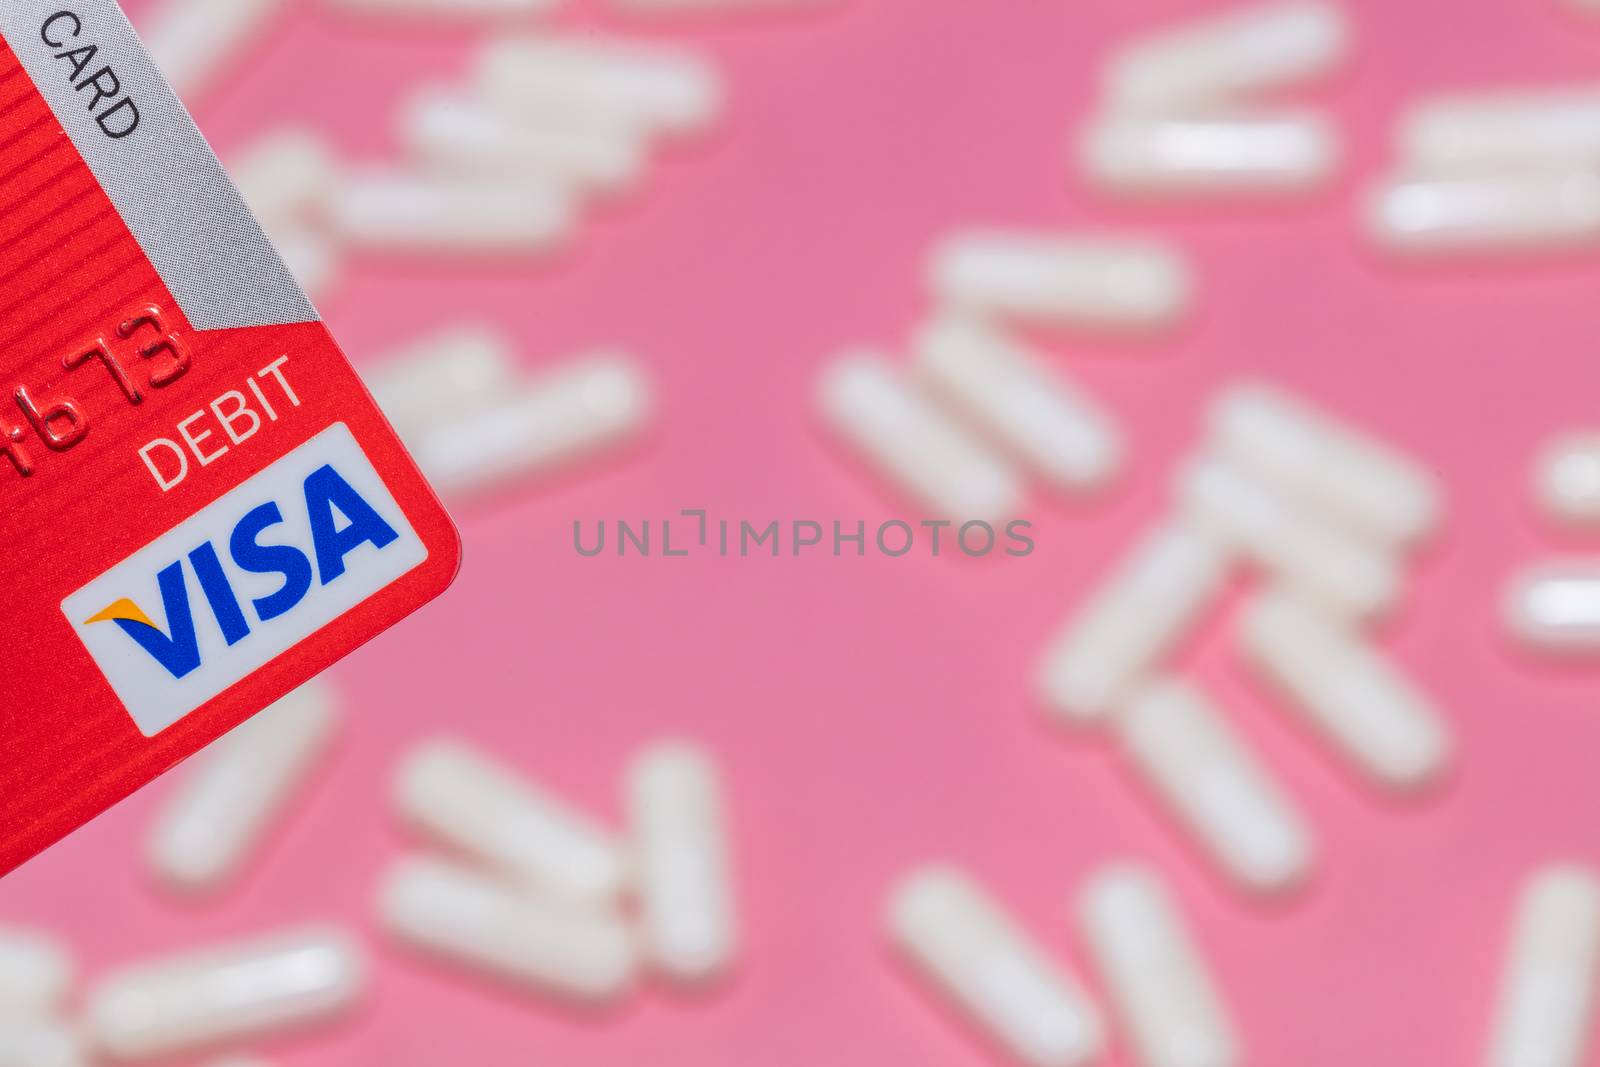 Barnaul, Russia - October 13, 2020: Shot of a corner of a red visa debit card and white pills out of focus on pink background. Healthcare, pharmaceutical business, commerce, shopping concepts. by DamantisZ